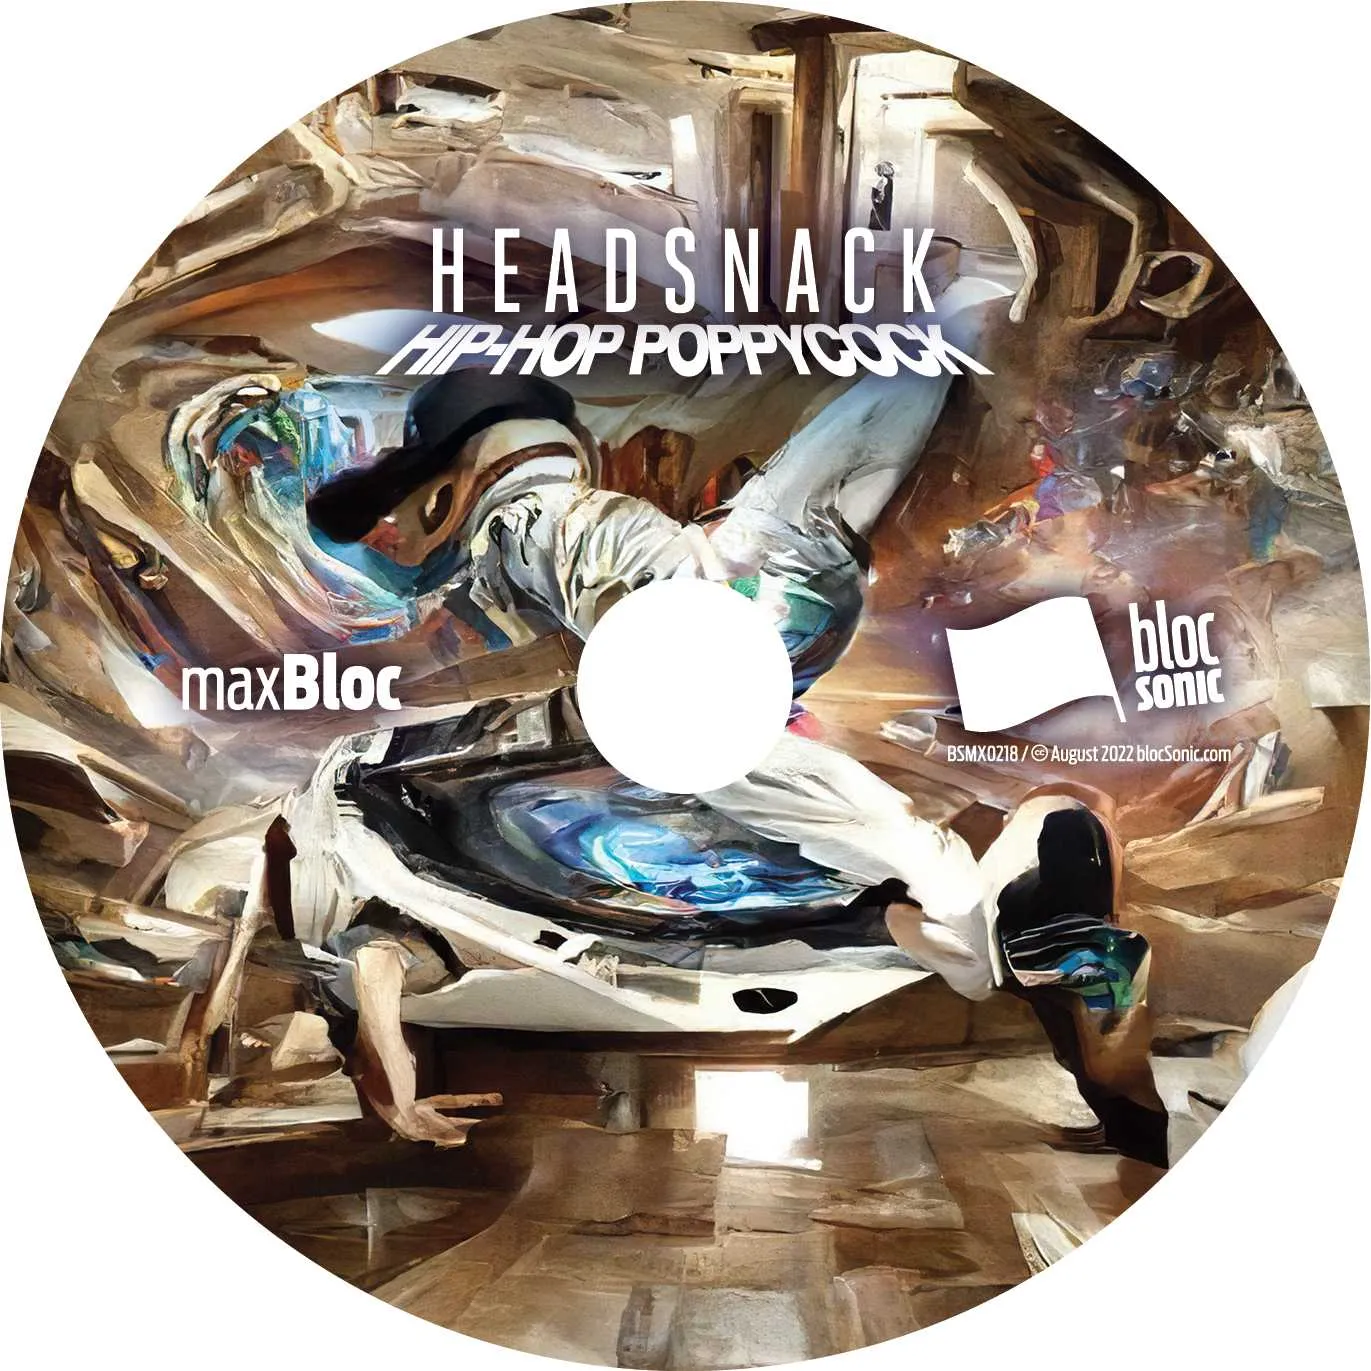 Album disc for “Hip-Hop Poppycock” by Headsnack